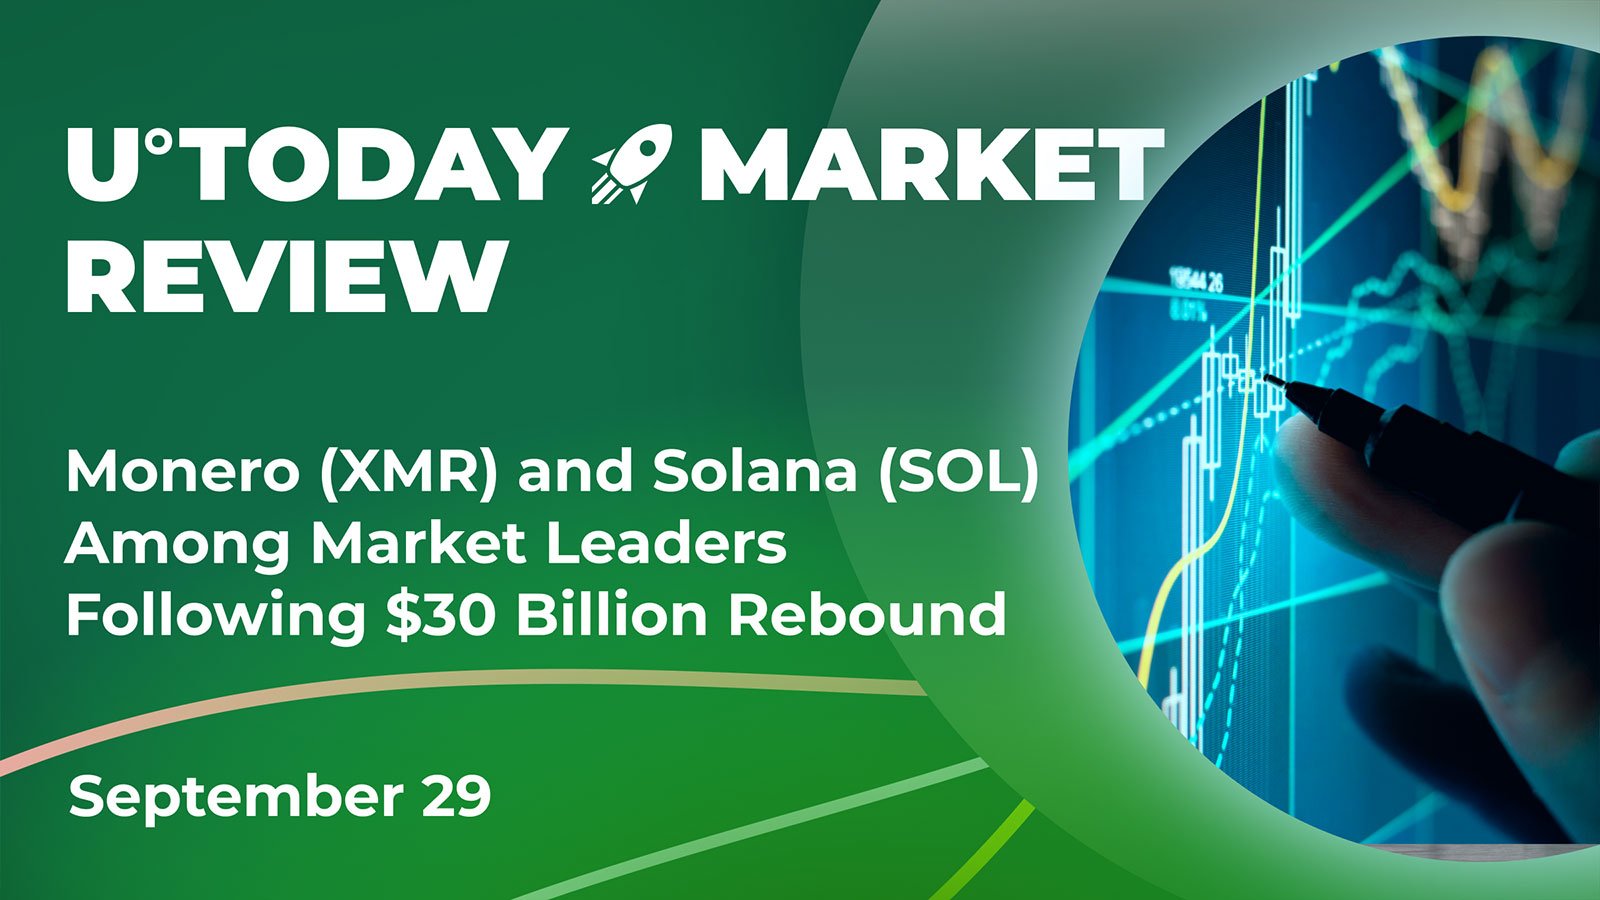 Monero (XMR) and Solana (SOL) Among Market Leaders Following $30 Billion Rebound: Crypto Market Review, September 29